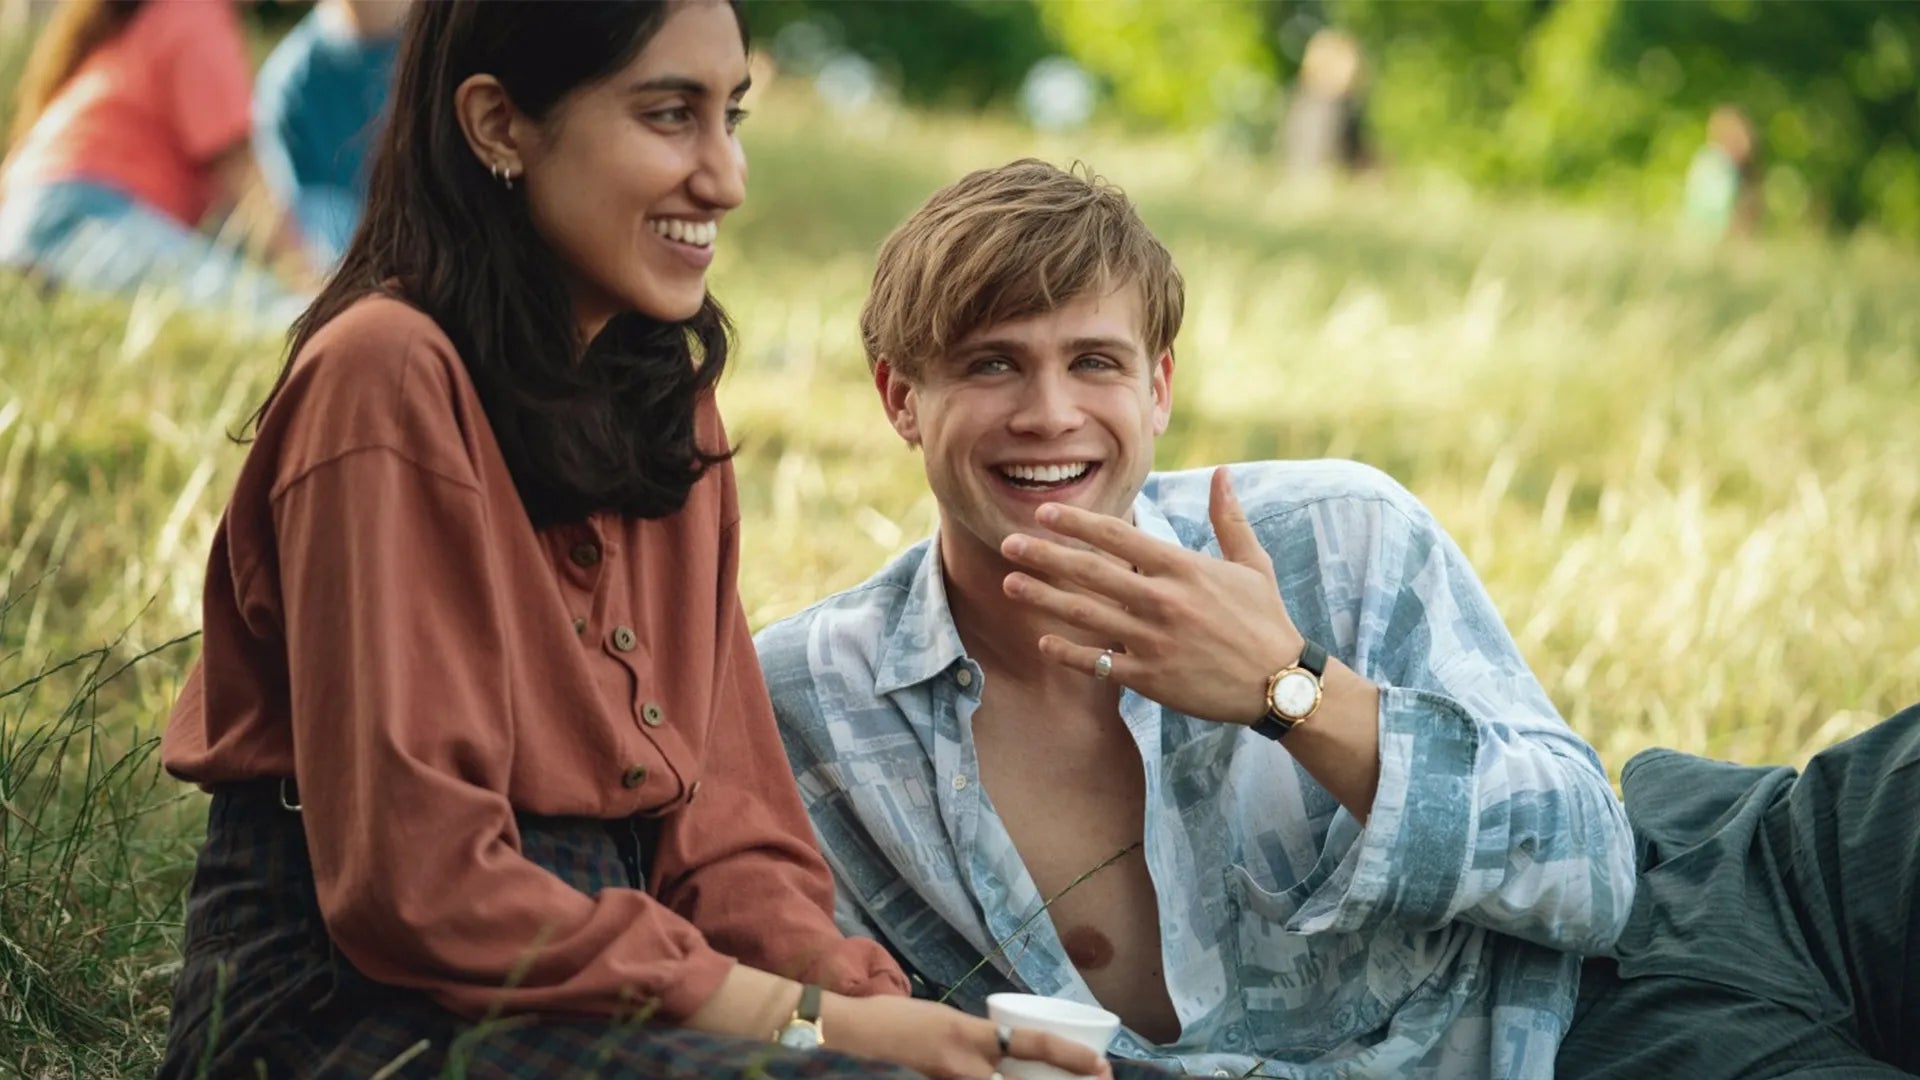 From Netflix's One Day to Everyday: Five Signet Rings to Style